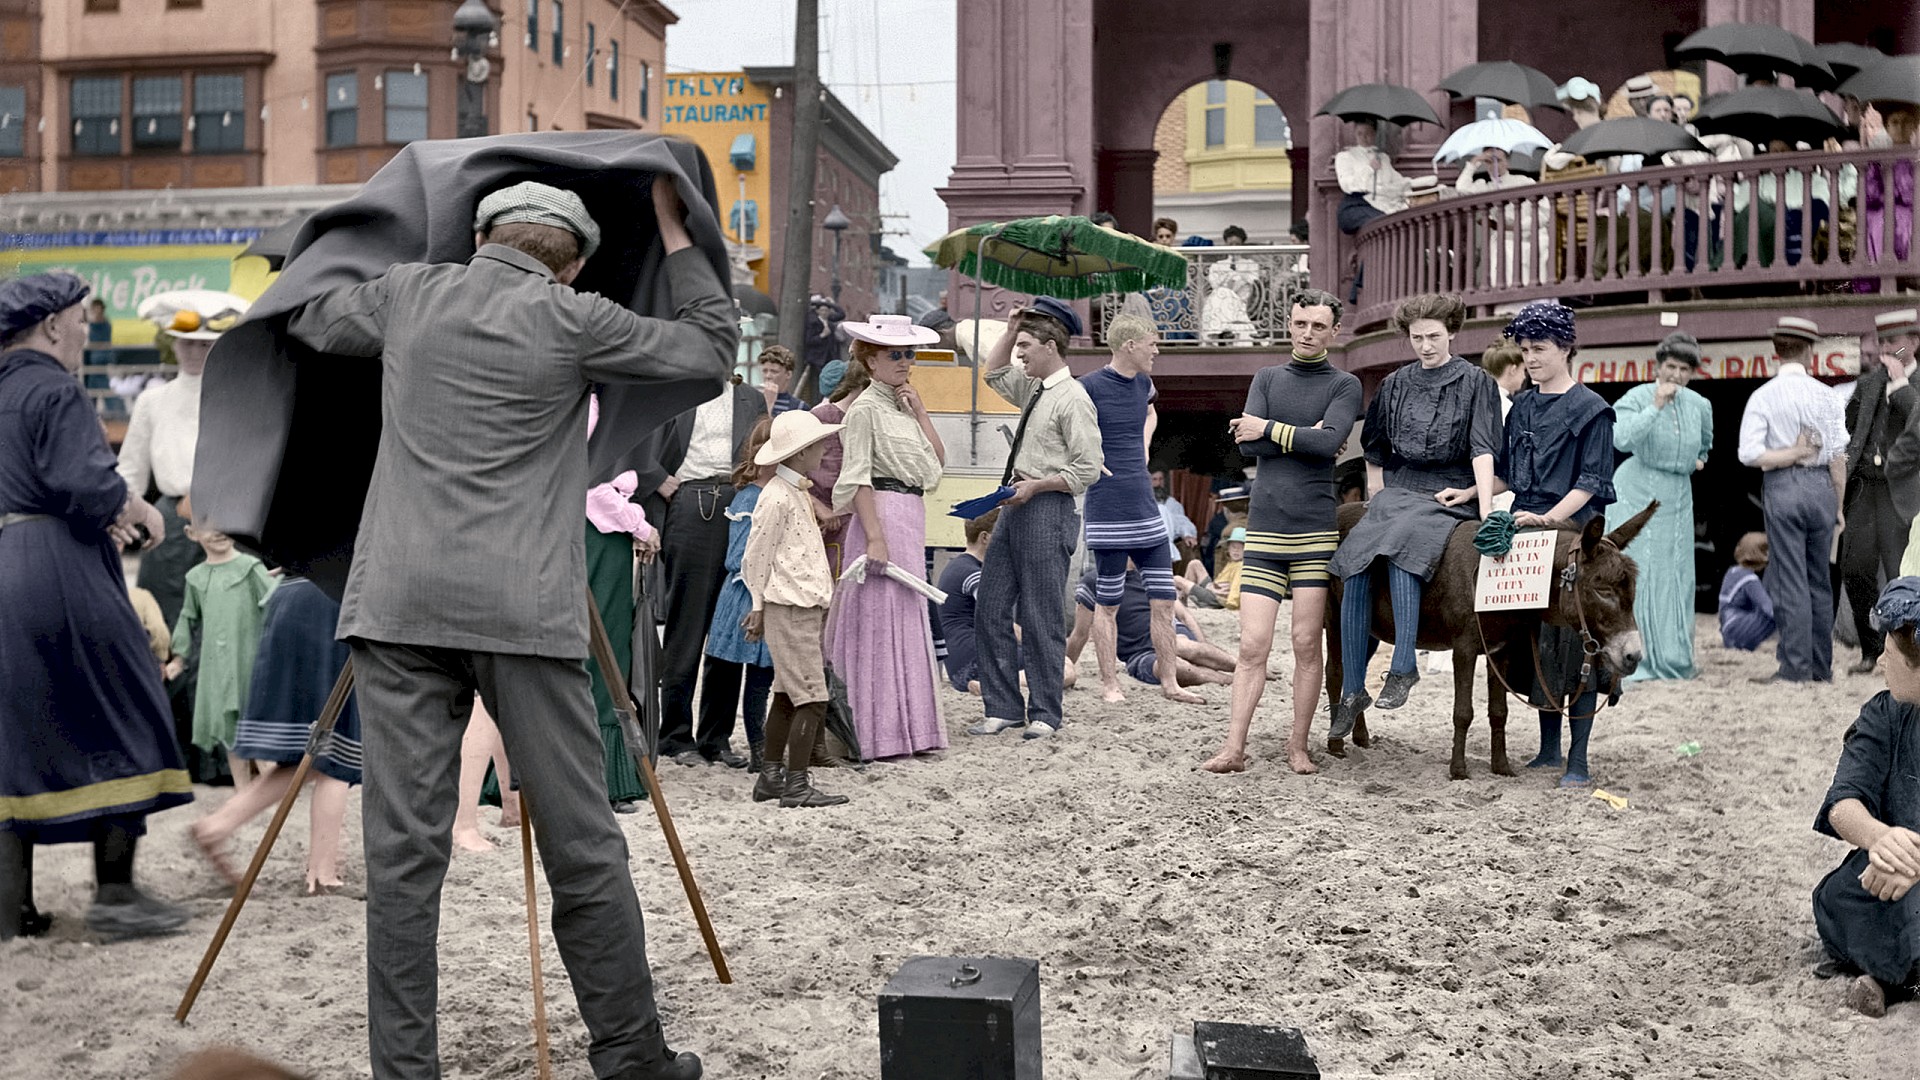 Yet another in my string of Atlantic City colorizations, this one taken in front of Richard's Baths. The original b&w is here. 

I went looking to see if I could find any information about the historical color of Richard's Baths.  I found a newsletter which references this very photograph, and mentions that Richard's Baths were a dark maroon color.  The purply color I came up with after much experimentation was the best I could approximate it.  

The newsletter is available as a pdf file.

This photo only took about ten hours to colorize, which means I'm getting better! View full size.